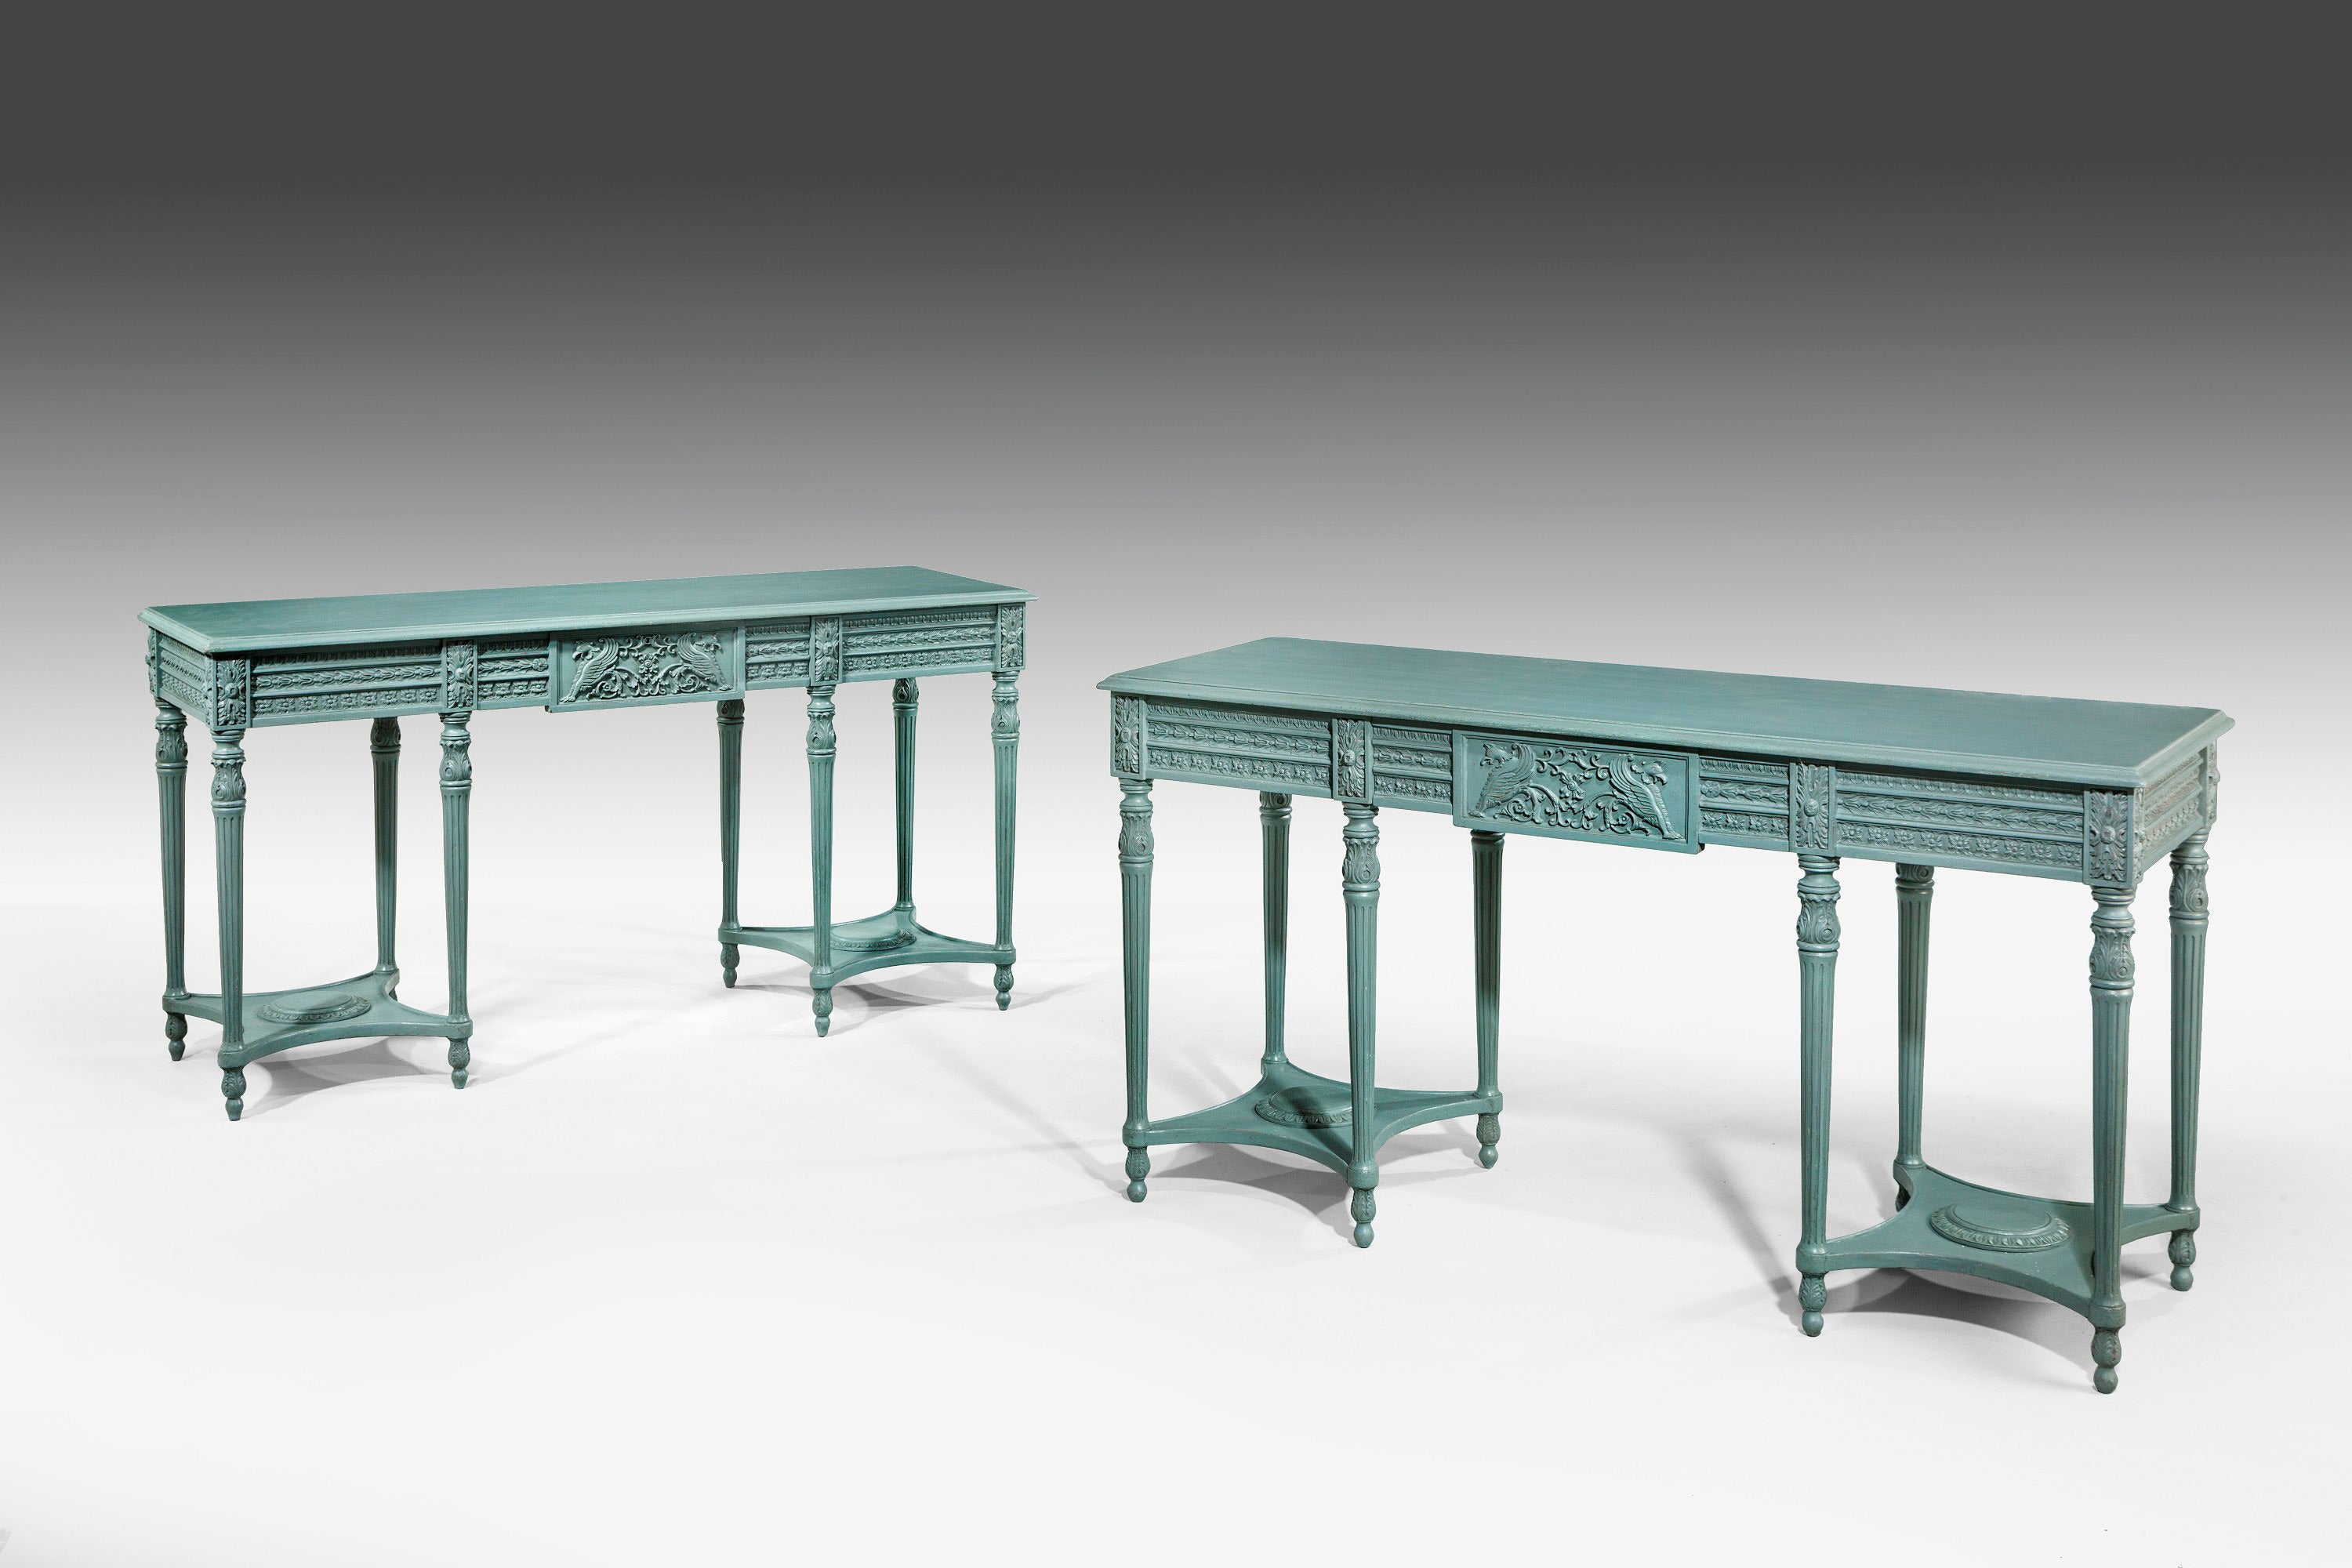 Pair of Mid-19th Century Pier Tables